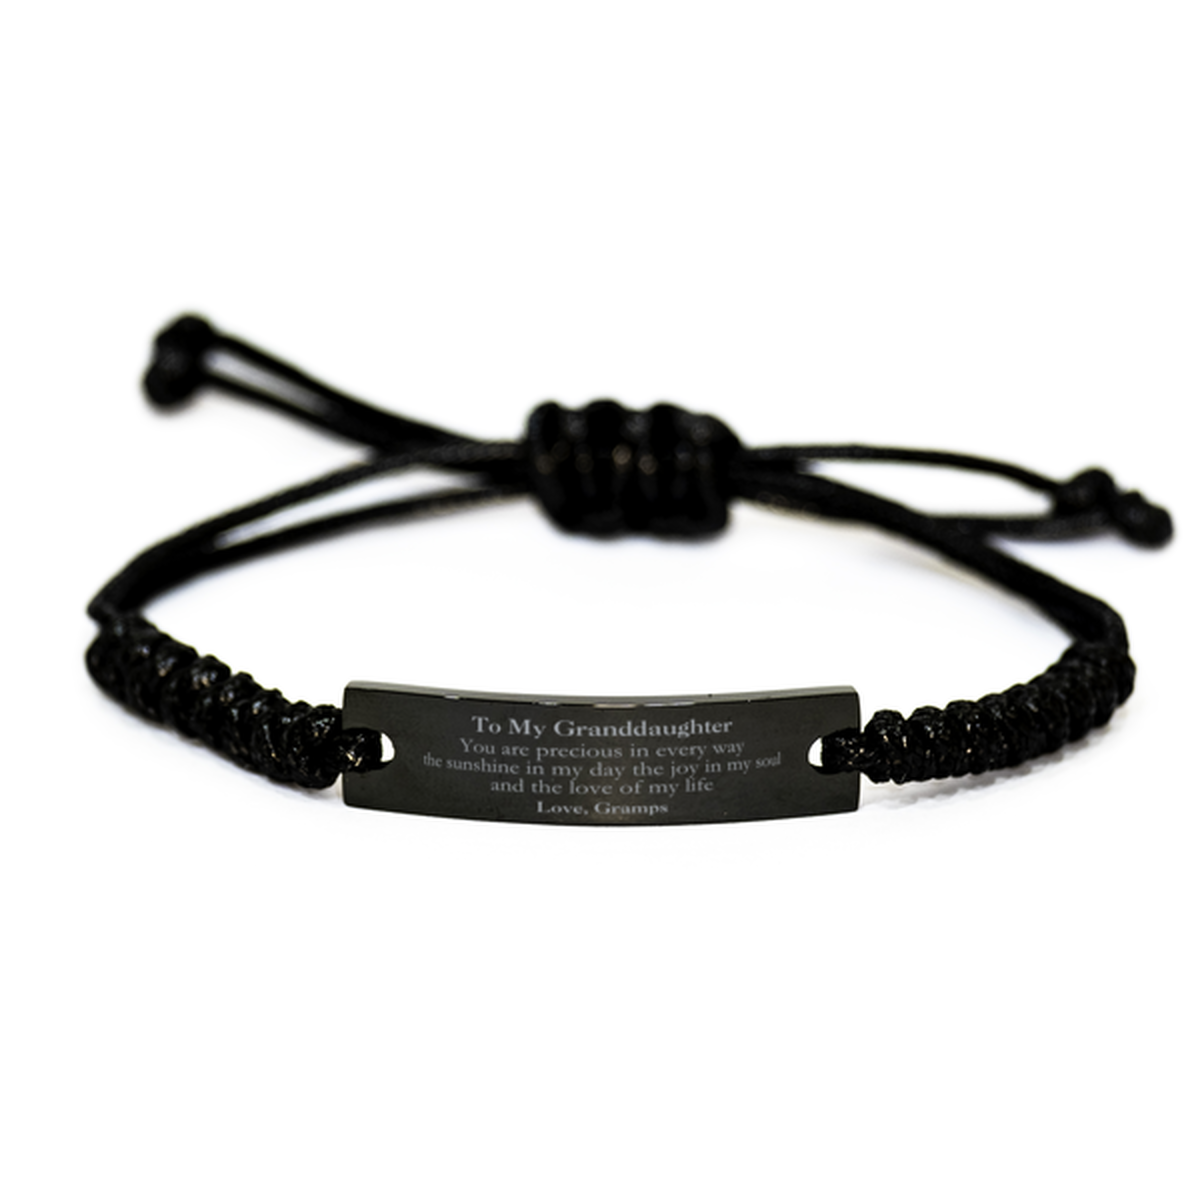 Graduation Gifts for Granddaughter Black Rope Bracelet Present from Gramps, Christmas Granddaughter Birthday Gifts Granddaughter You are precious in every way the sunshine in my day. Love, Gramps